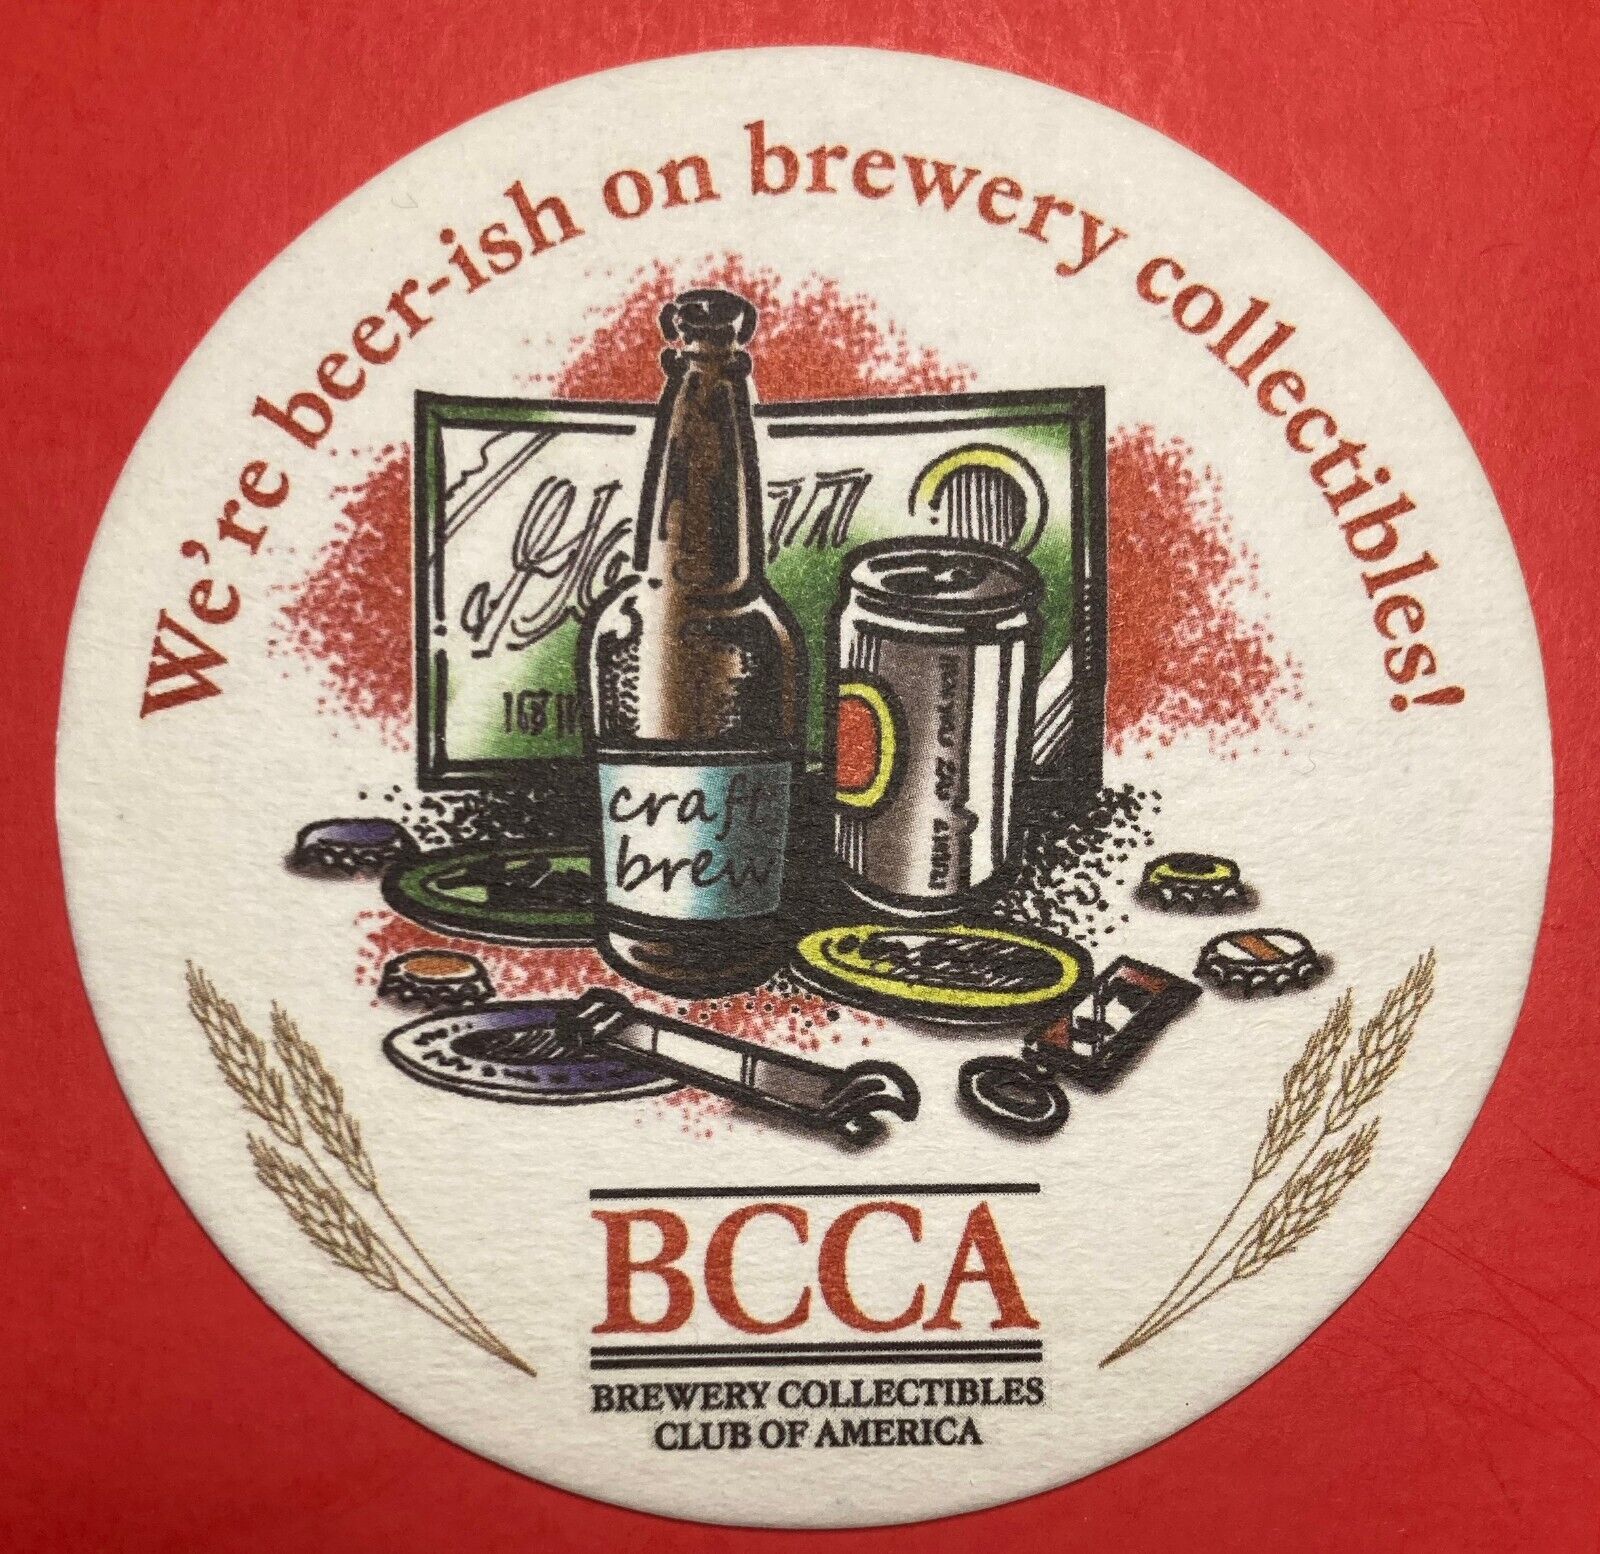 BCCA BREWERY COLLECTIBLES CLUB OF AMERICA 4 INCH round Beer COASTER